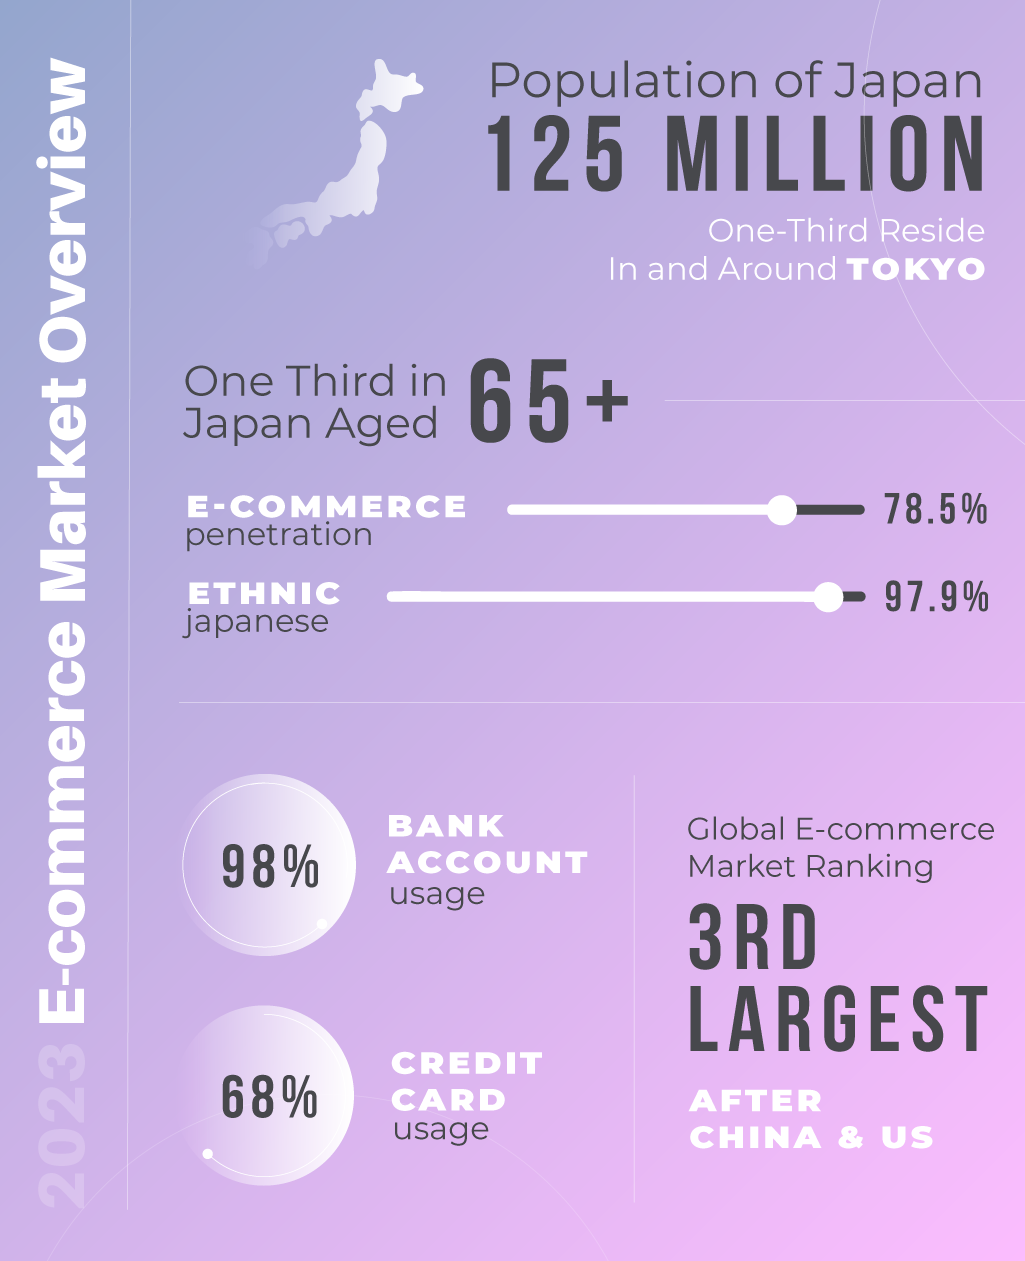 Primary infographic market overview data for e-commerce in Japan